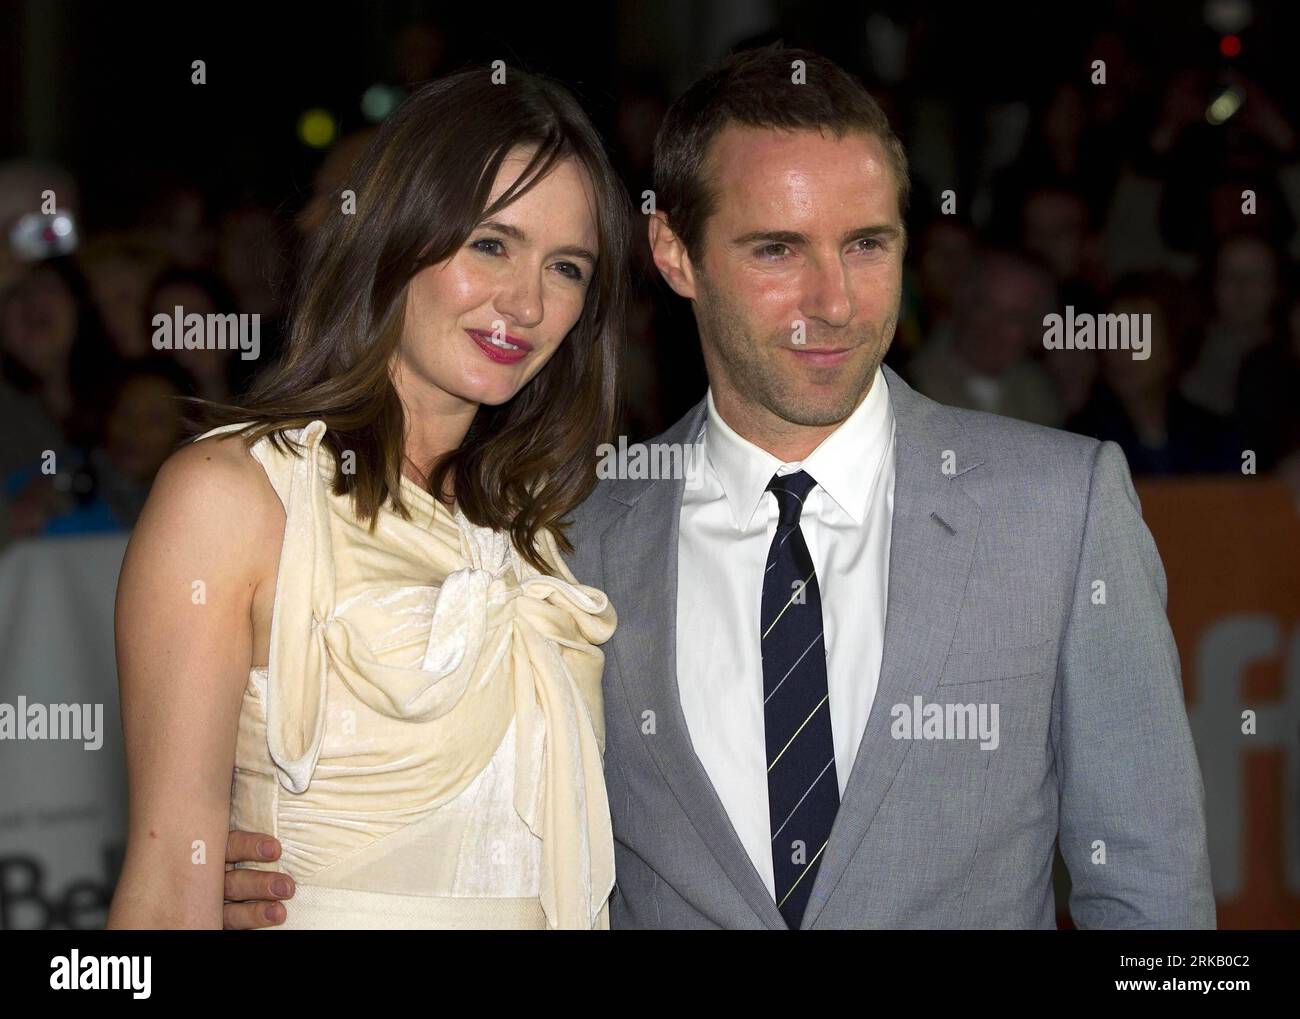 Bildnummer: 54439663  Datum: 17.09.2010  Copyright: imago/Xinhua (100918) -- TORONTO, Sept. 18, 2010 (Xinhua) -- Actress Emily Mortimer (L) and actor Alessandro Nivola arrives for the screening of the film Janie Jones at the Roy Thomson Hall during the 35th Toronto International Film Festival in Toronto, Canada, Sept. 17, 2010. (Xinhua/Zou Zheng) CANADA-TORONTO INTERNATIONAL FILM FESTIVAL- JANIE JONES PUBLICATIONxNOTxINxCHN People Kultur Filmfestival premiumd xint kbdig xmk 2010 quer o0 Familie Frau Ehefrau Mann Ehemann    Bildnummer 54439663 Date 17 09 2010 Copyright Imago XINHUA  Toronto Sep Stock Photo